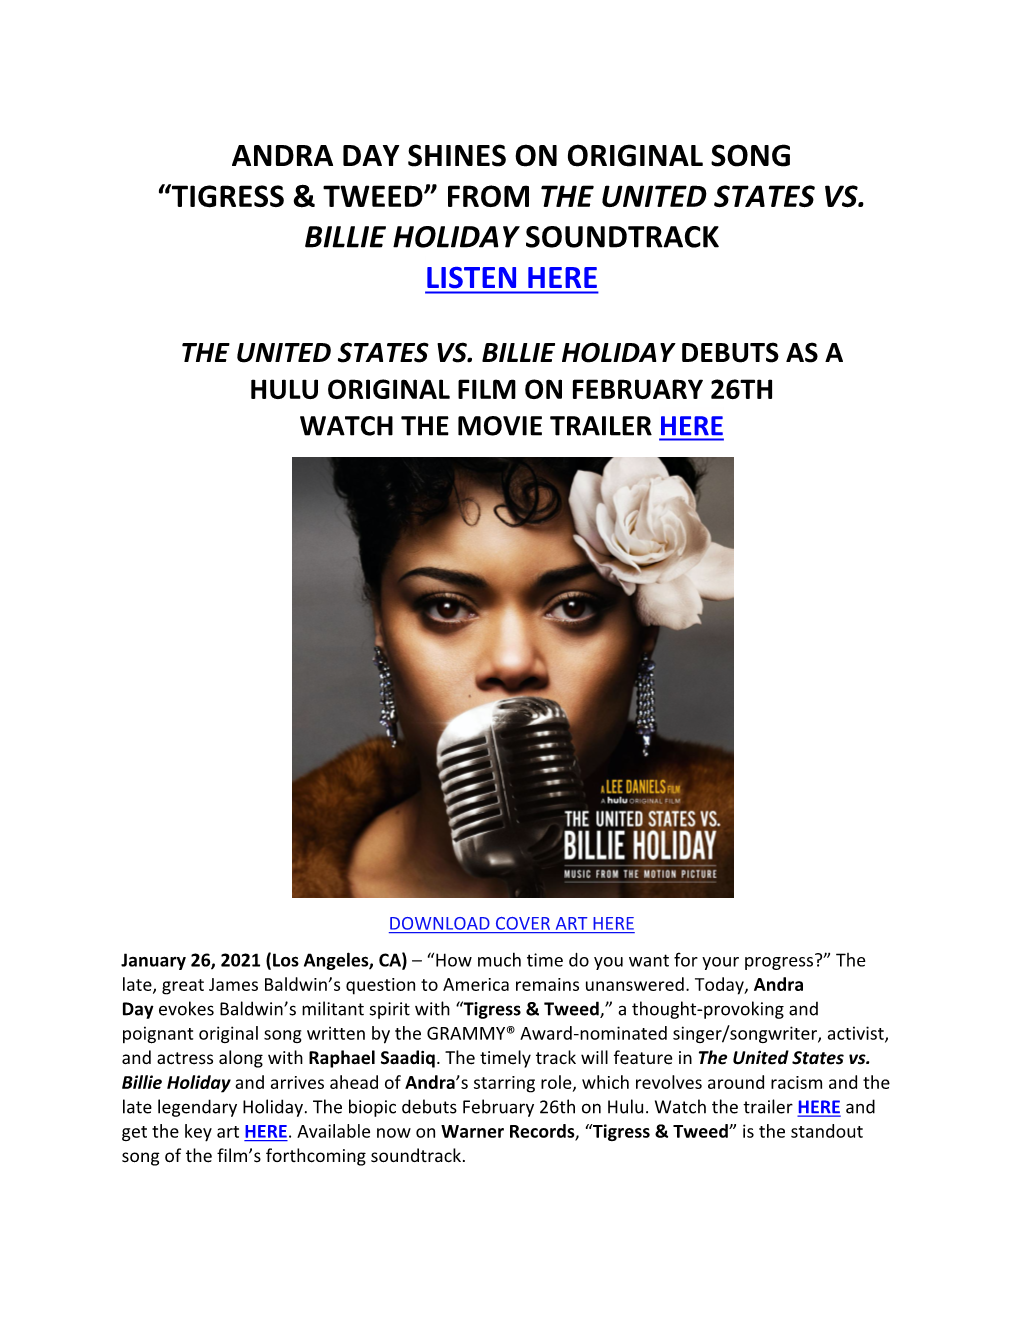 Andra Day Shines on Original Song “Tigress & Tweed” from the United States Vs